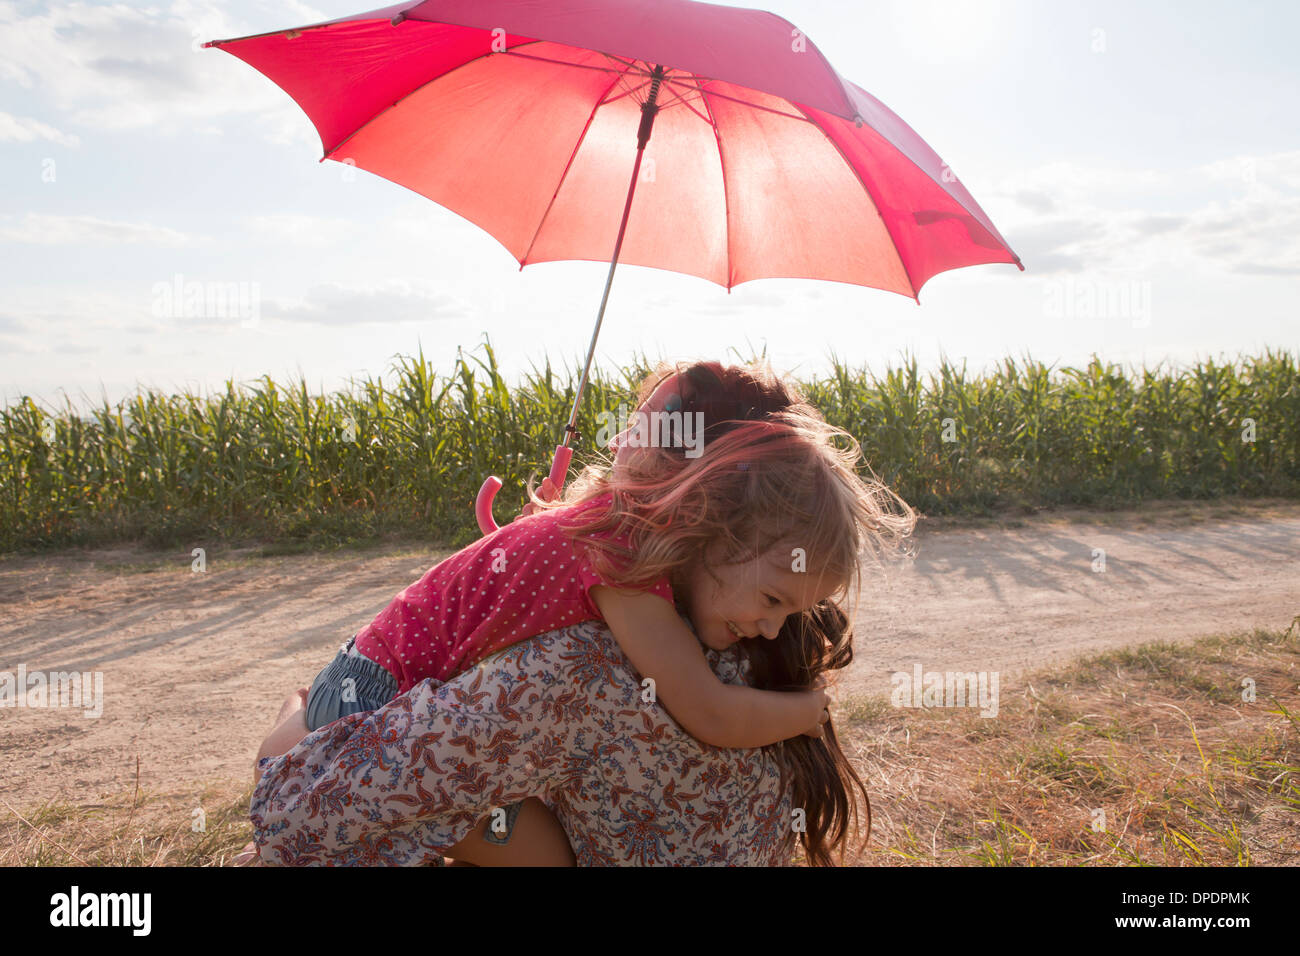 Mother and daughter hugging under red umbrella Stock Photo